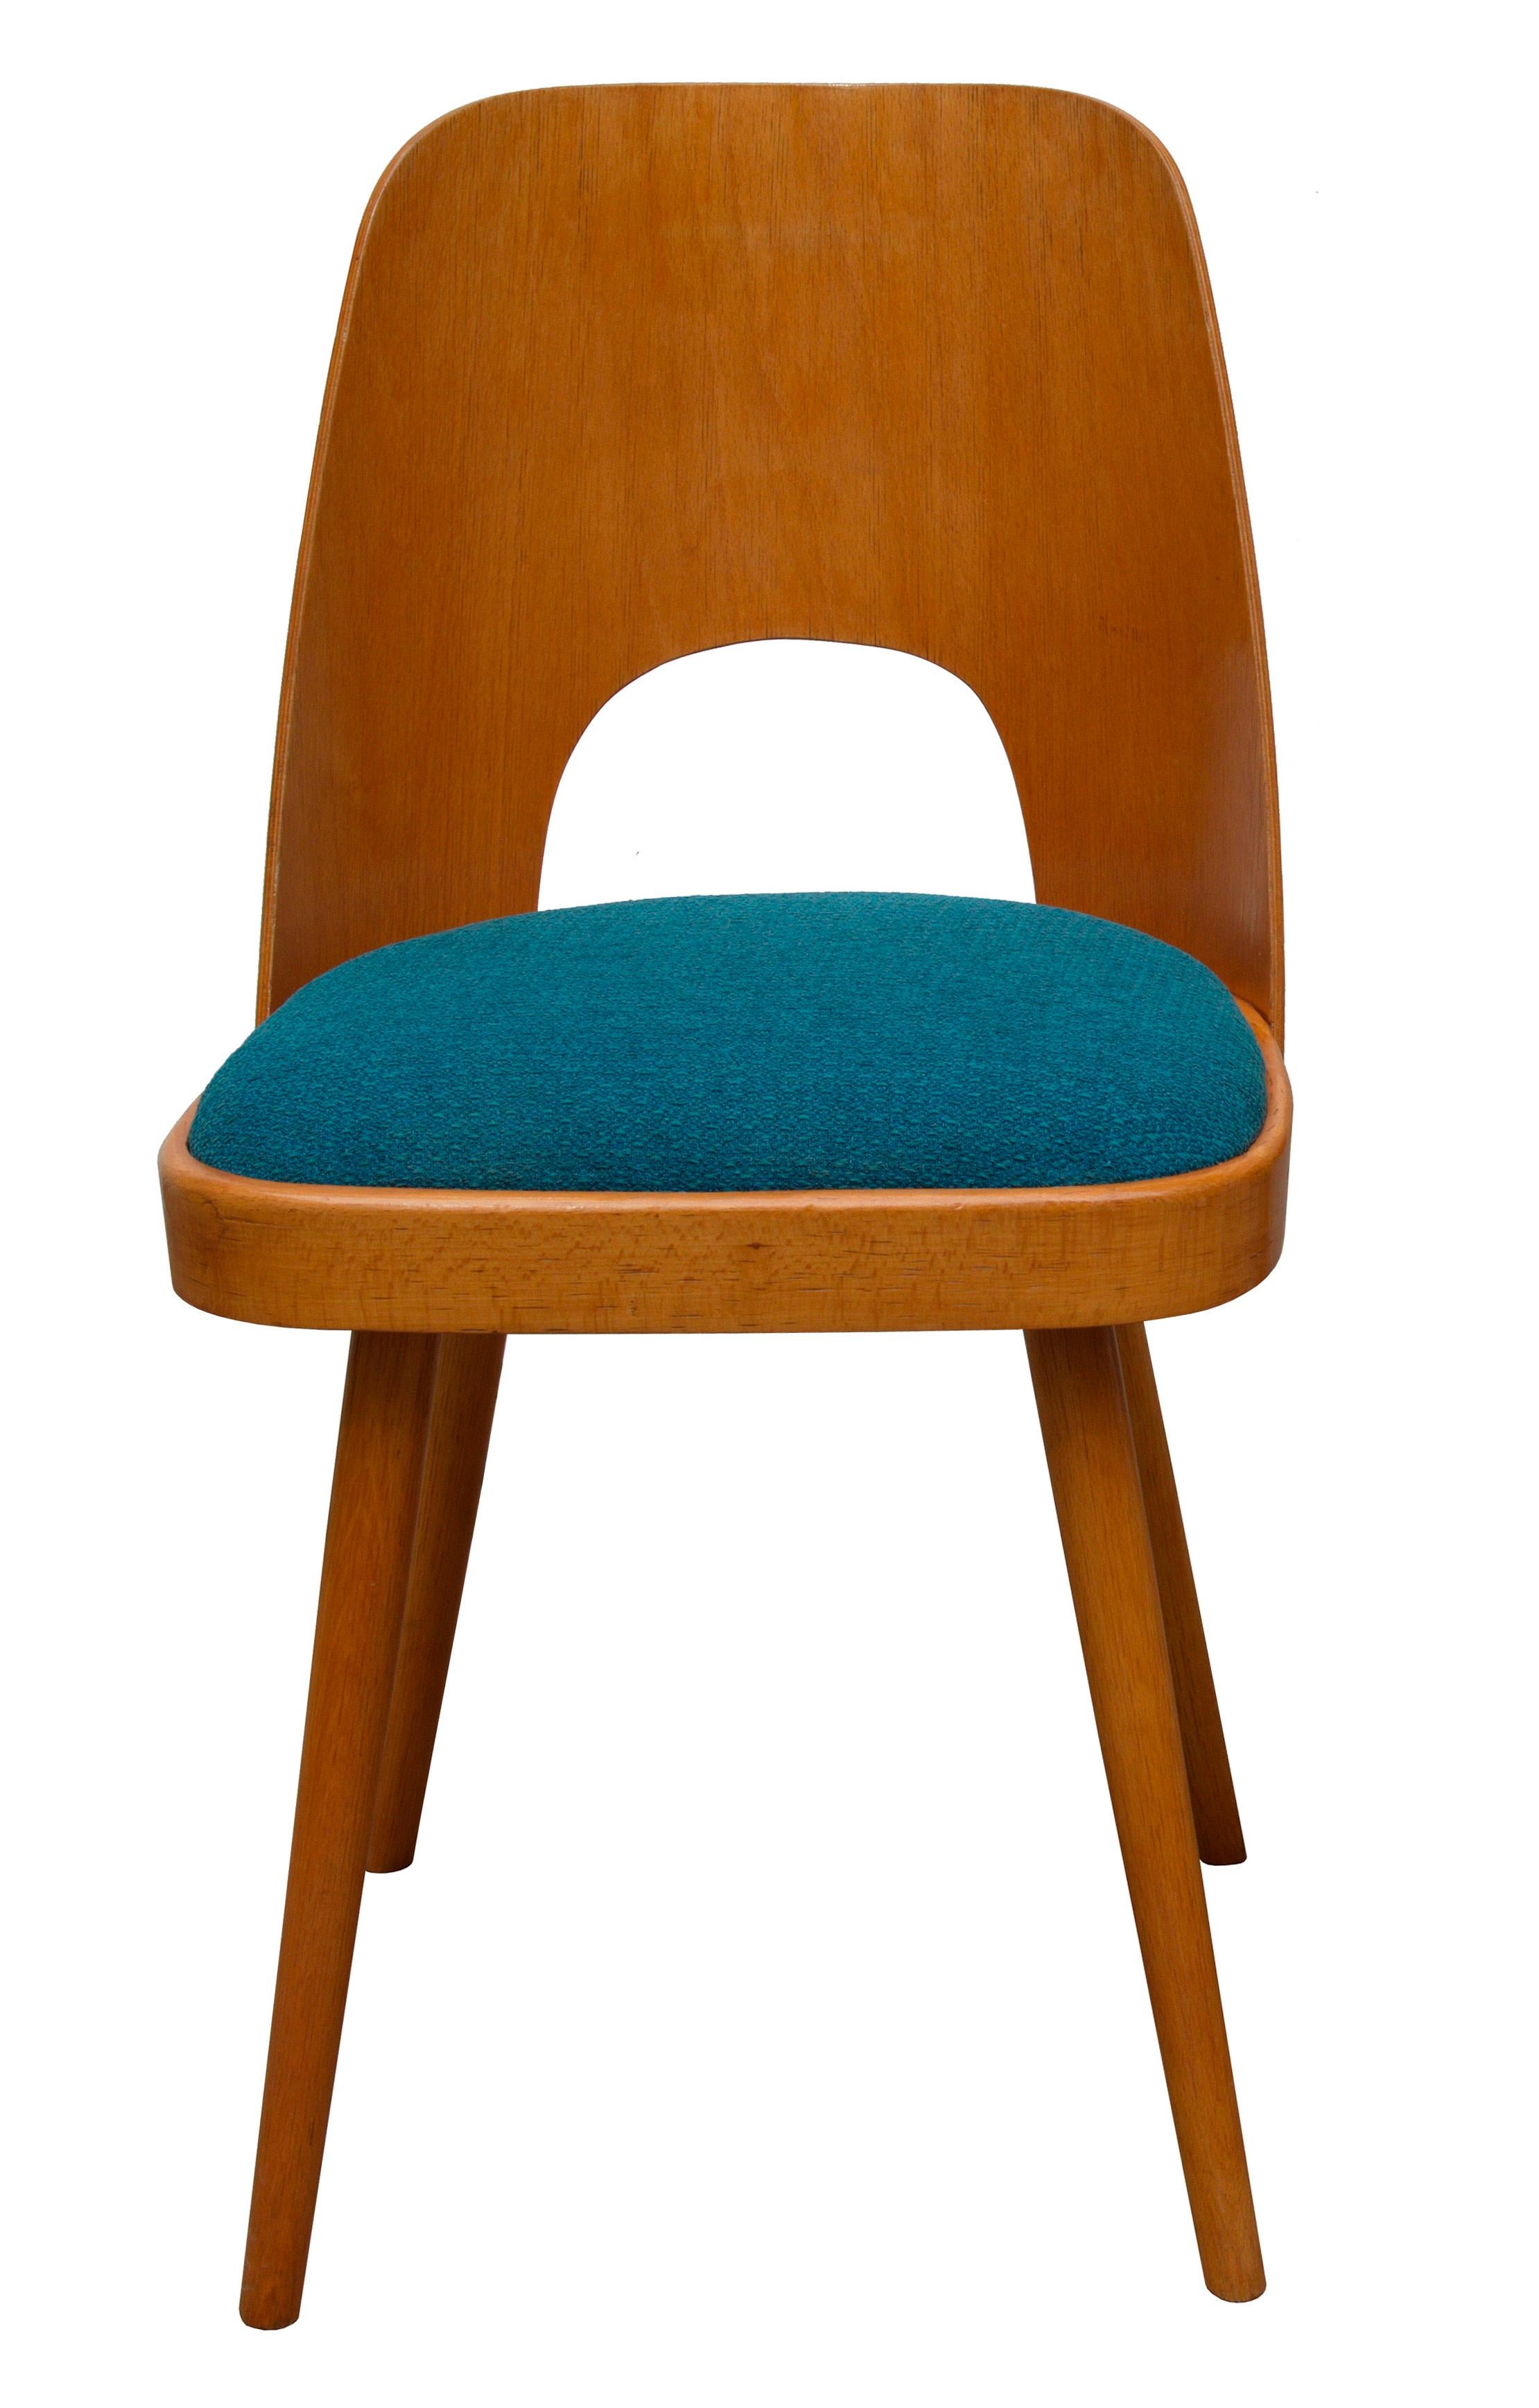 Oswald Haerdl, one of the most important Austrian Architects of the 20th century designed this iconic chair in 1955 labelled 'No. 515’.
Haerdl was a master of proportions. On this chair he created an expressive design form whilst using a minimalist